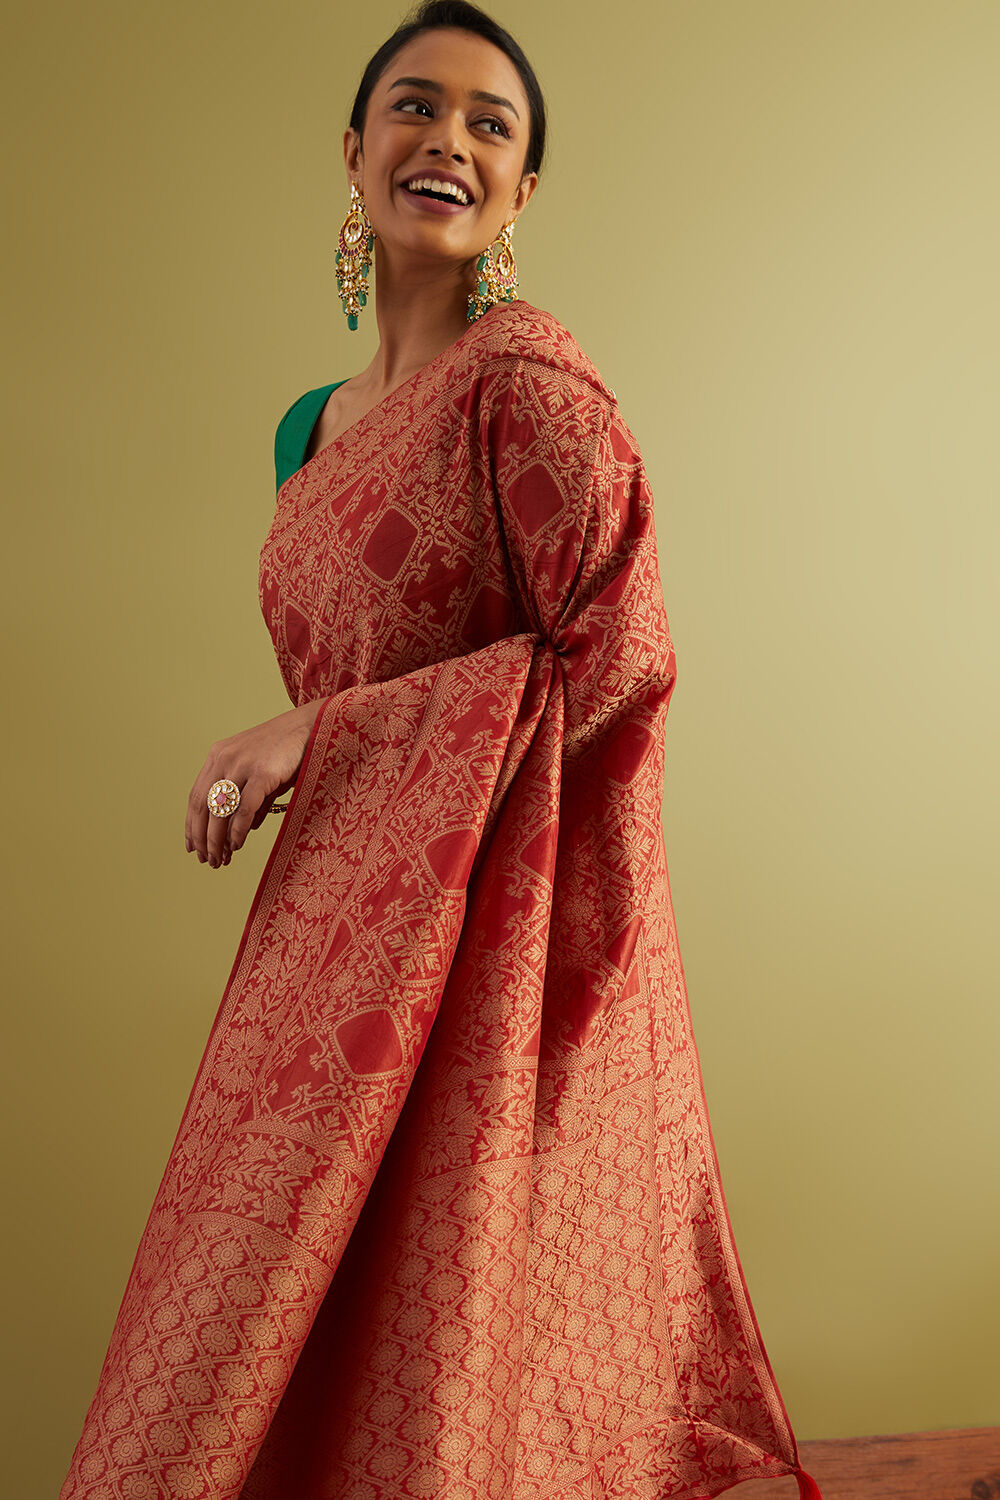 Shop For Sarees & Ethnic Wear In Bangalore With Taneira | LBB, Bangalore